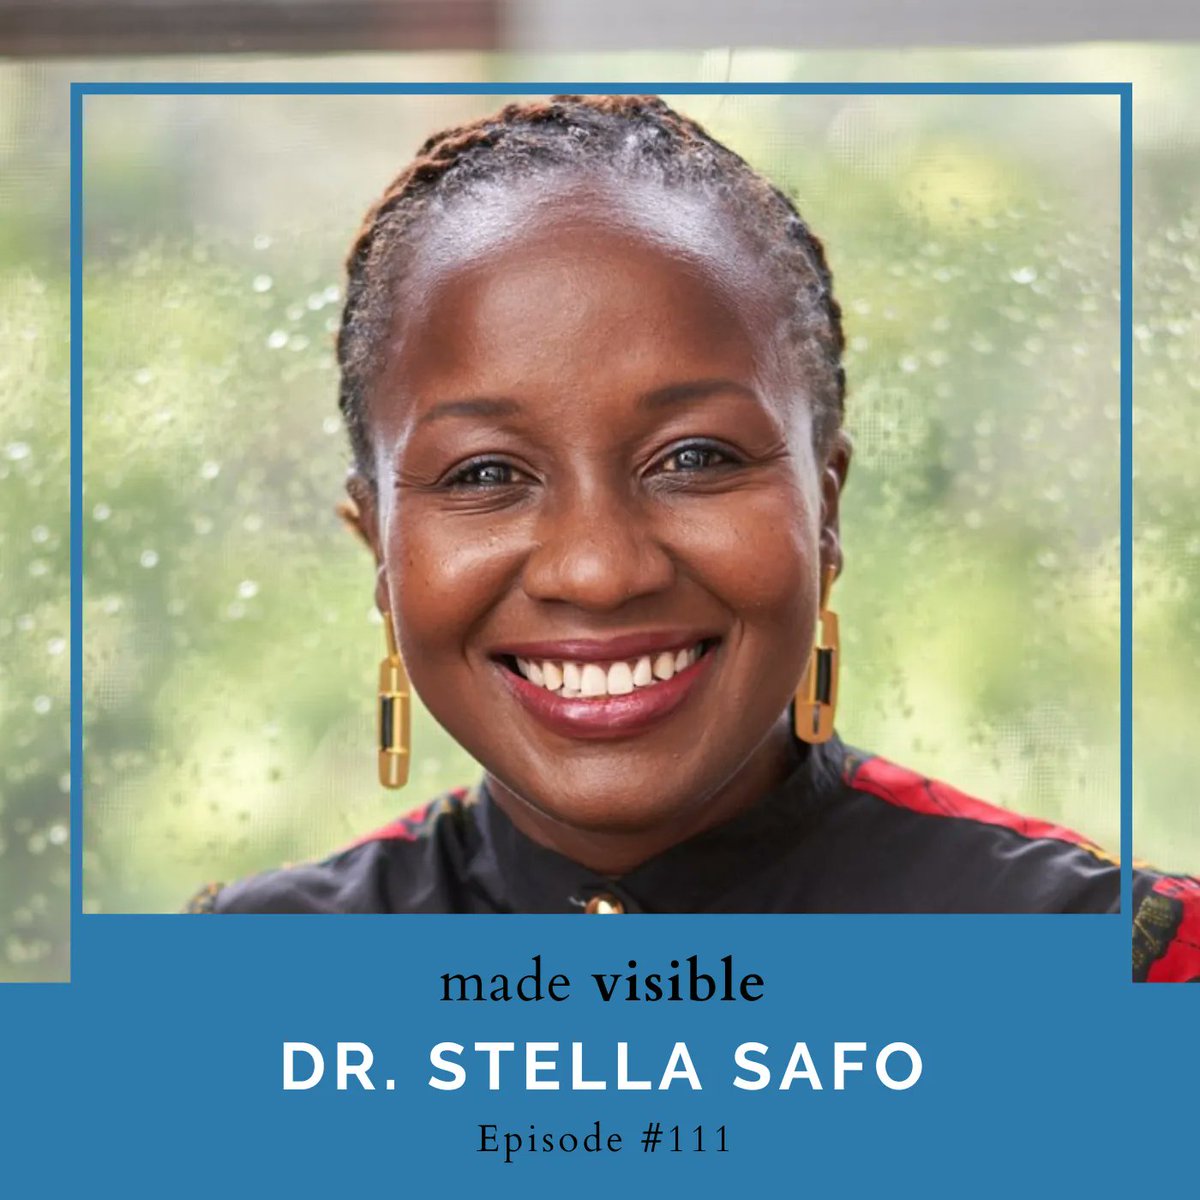 #ICYMI: JEH's own Dr. Stella Safo (@AmmahStarr) was the latest guest on the 'Made Visible' podcast with @harper_spero! Listen now to this conversation on chronic illness, stigma, and health equity: buff.ly/3lNpzs5